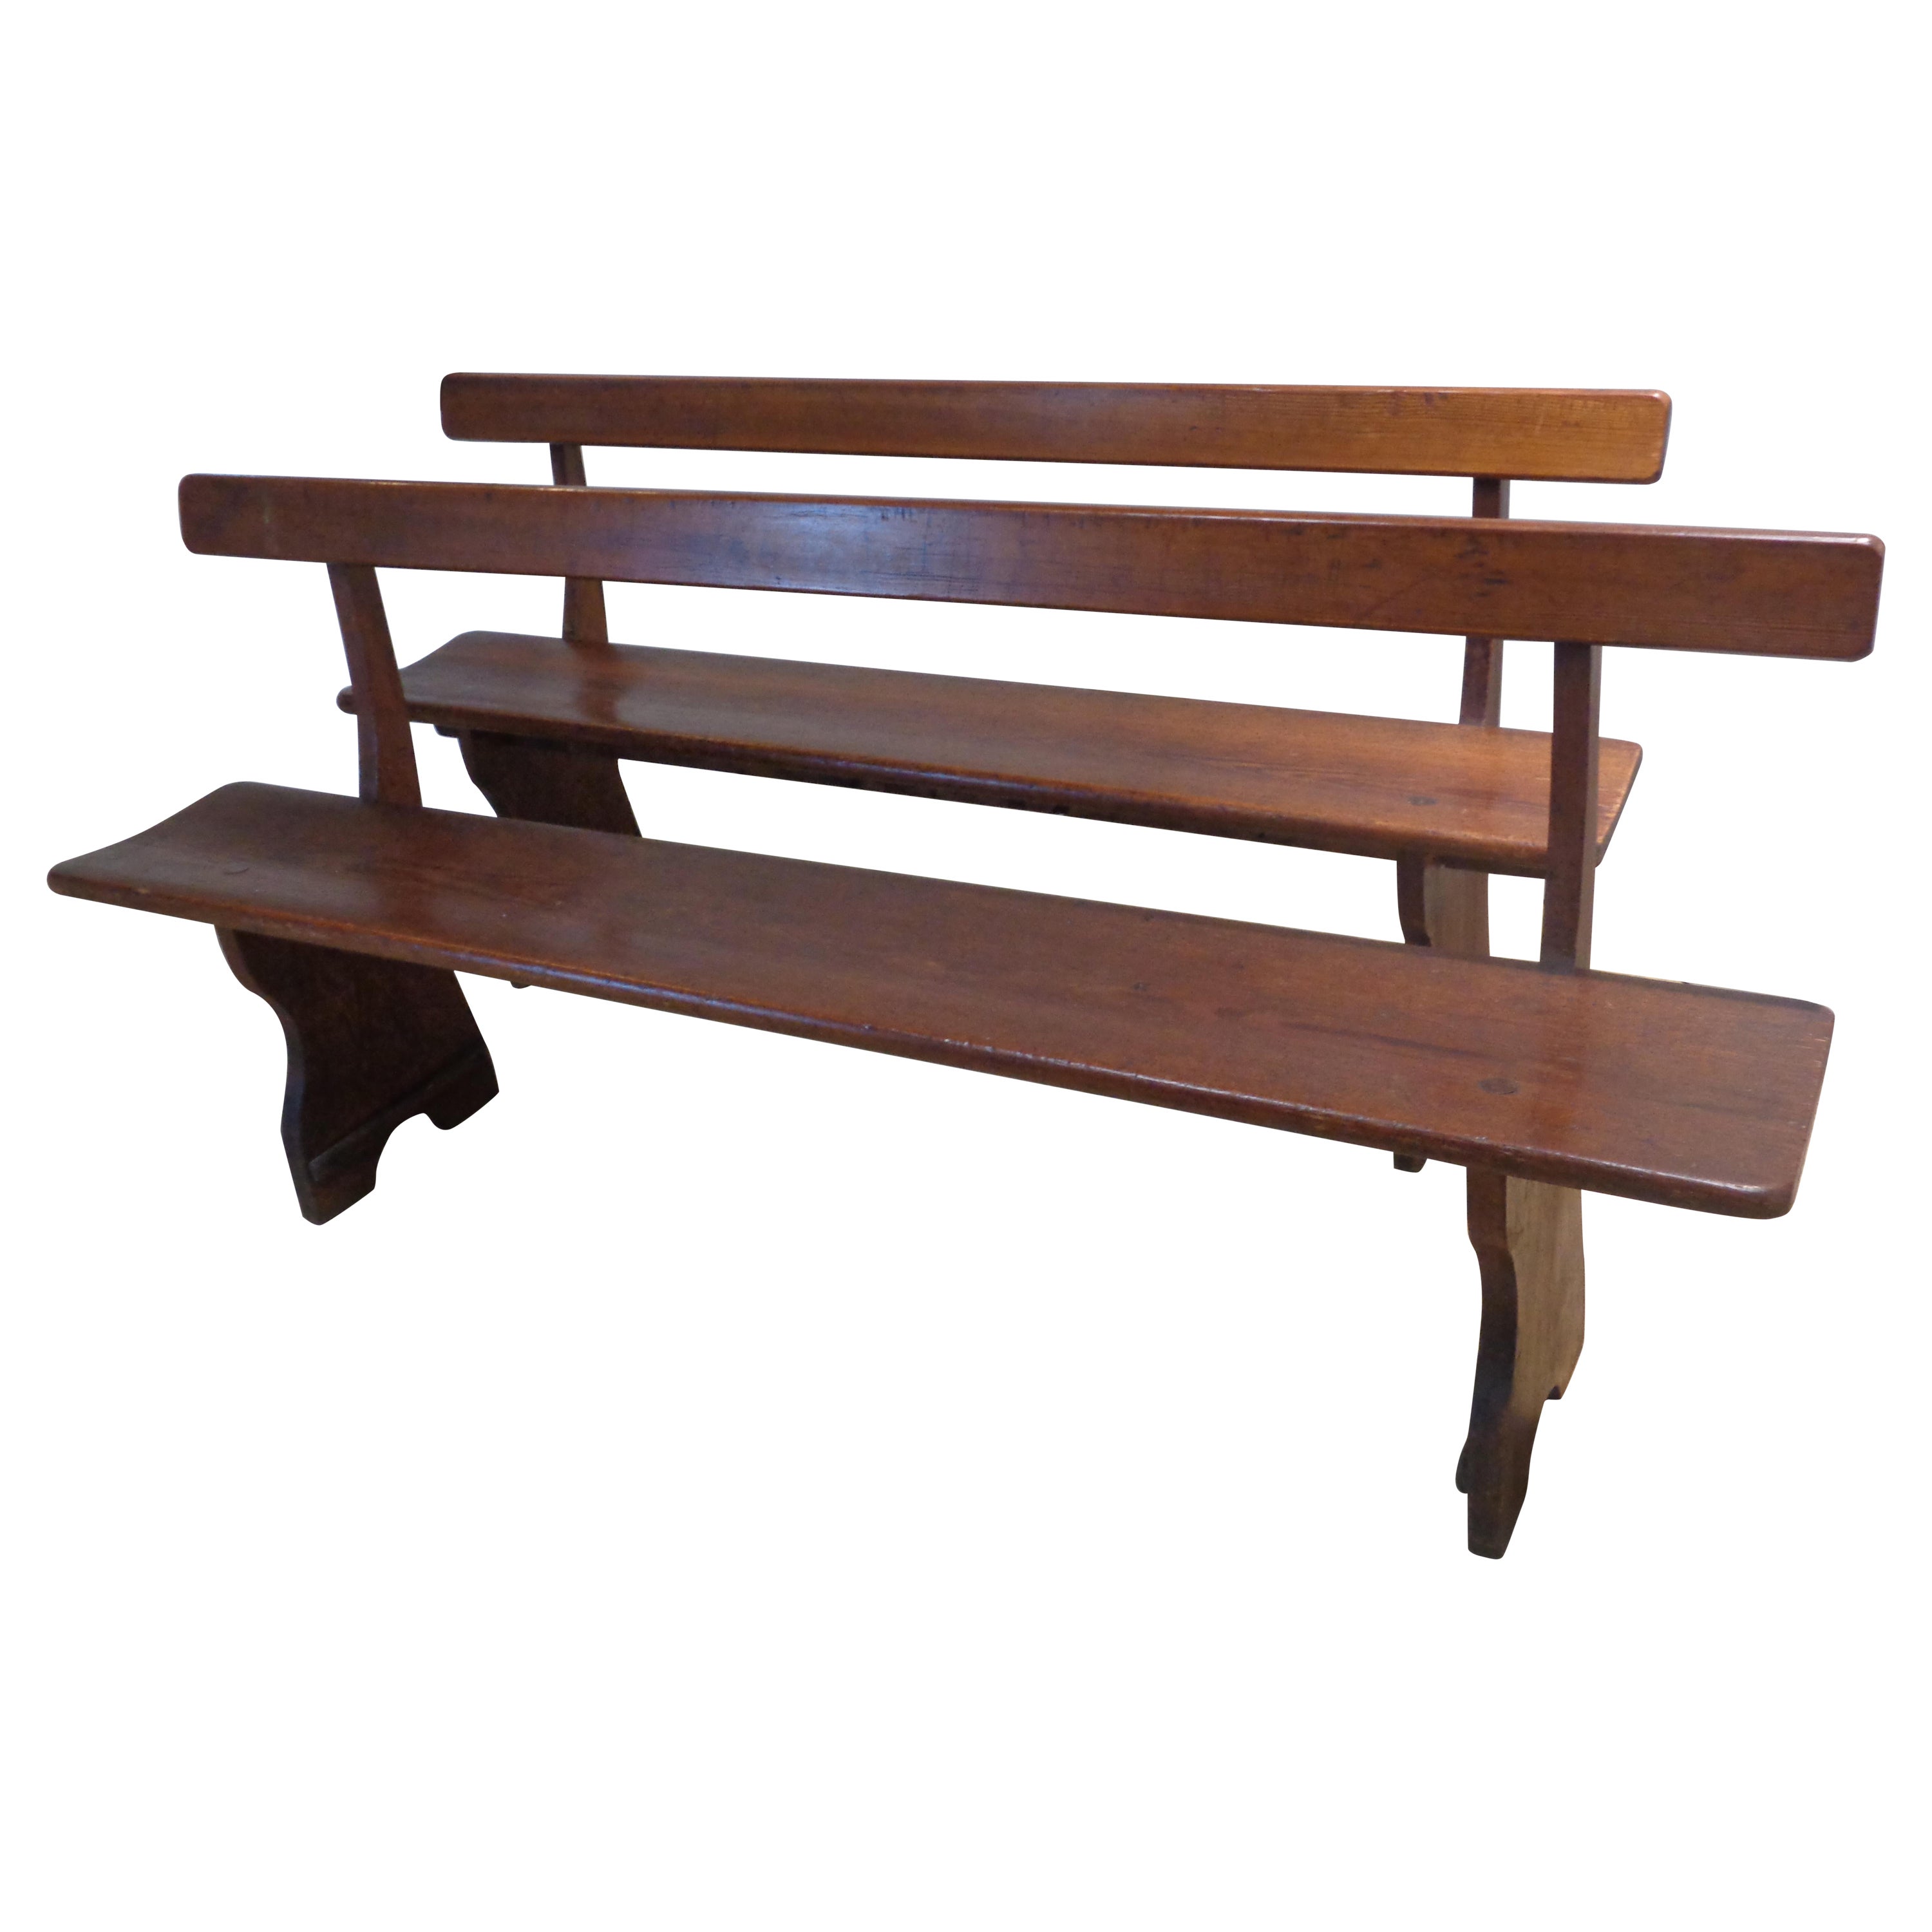  Exceptional Antique American Country Benches